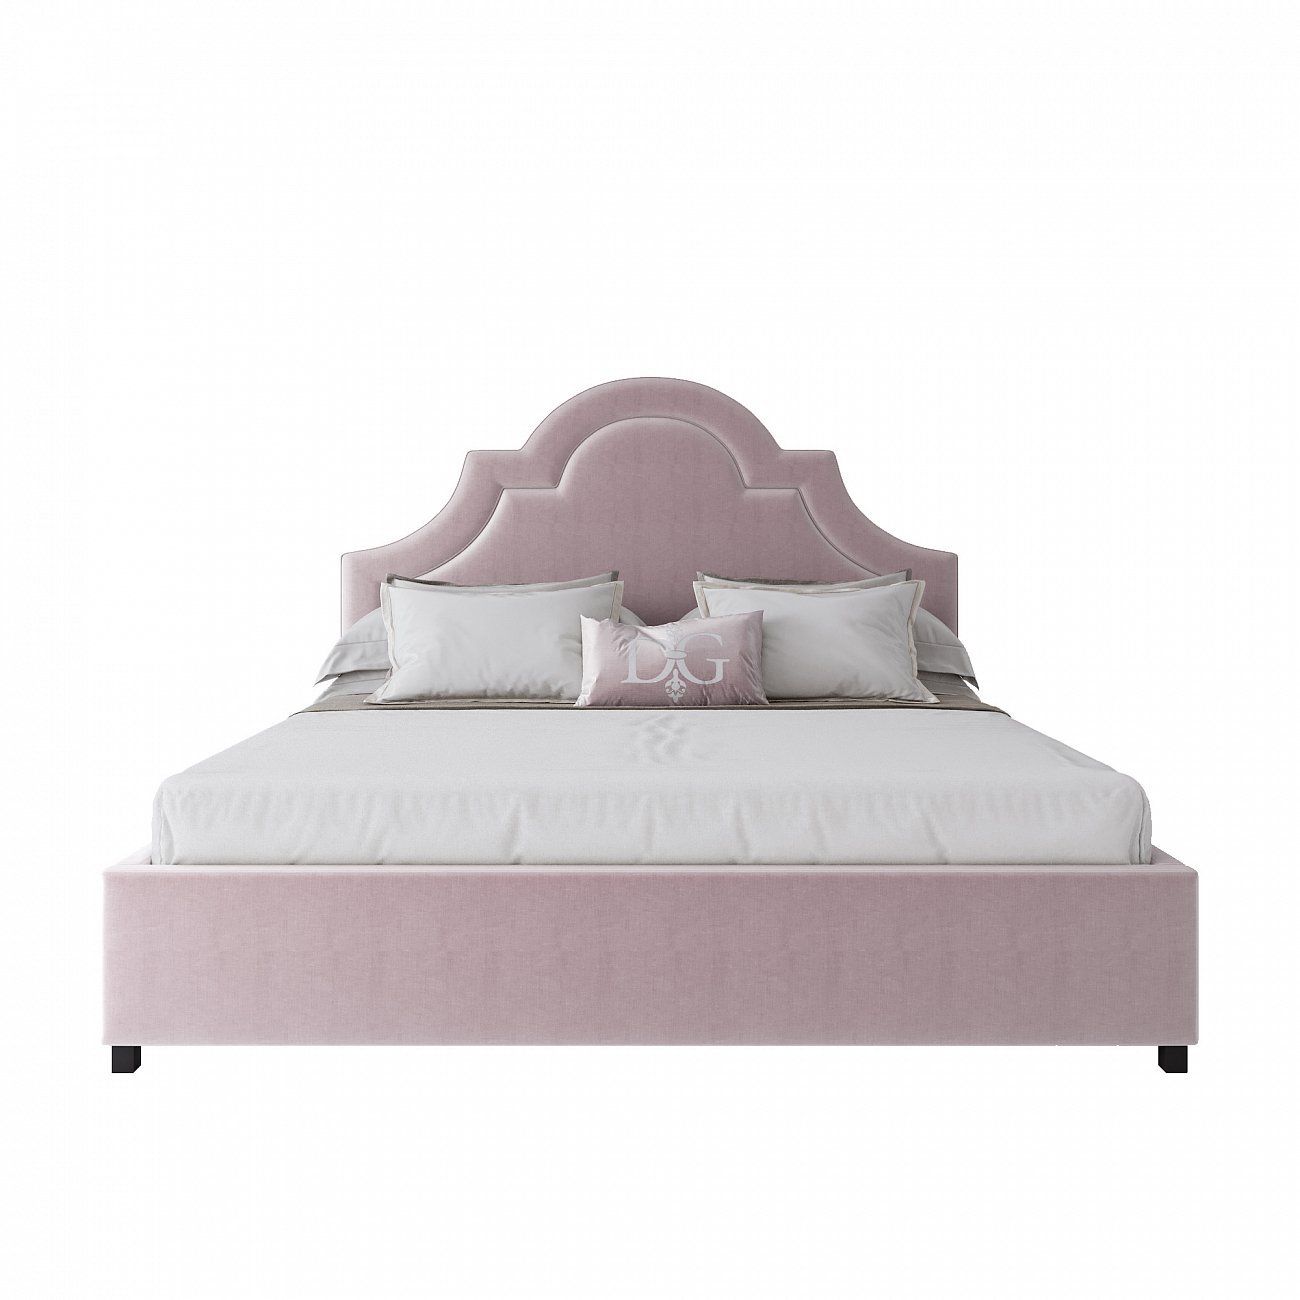 Double bed 180x200 cm pink Kennedy